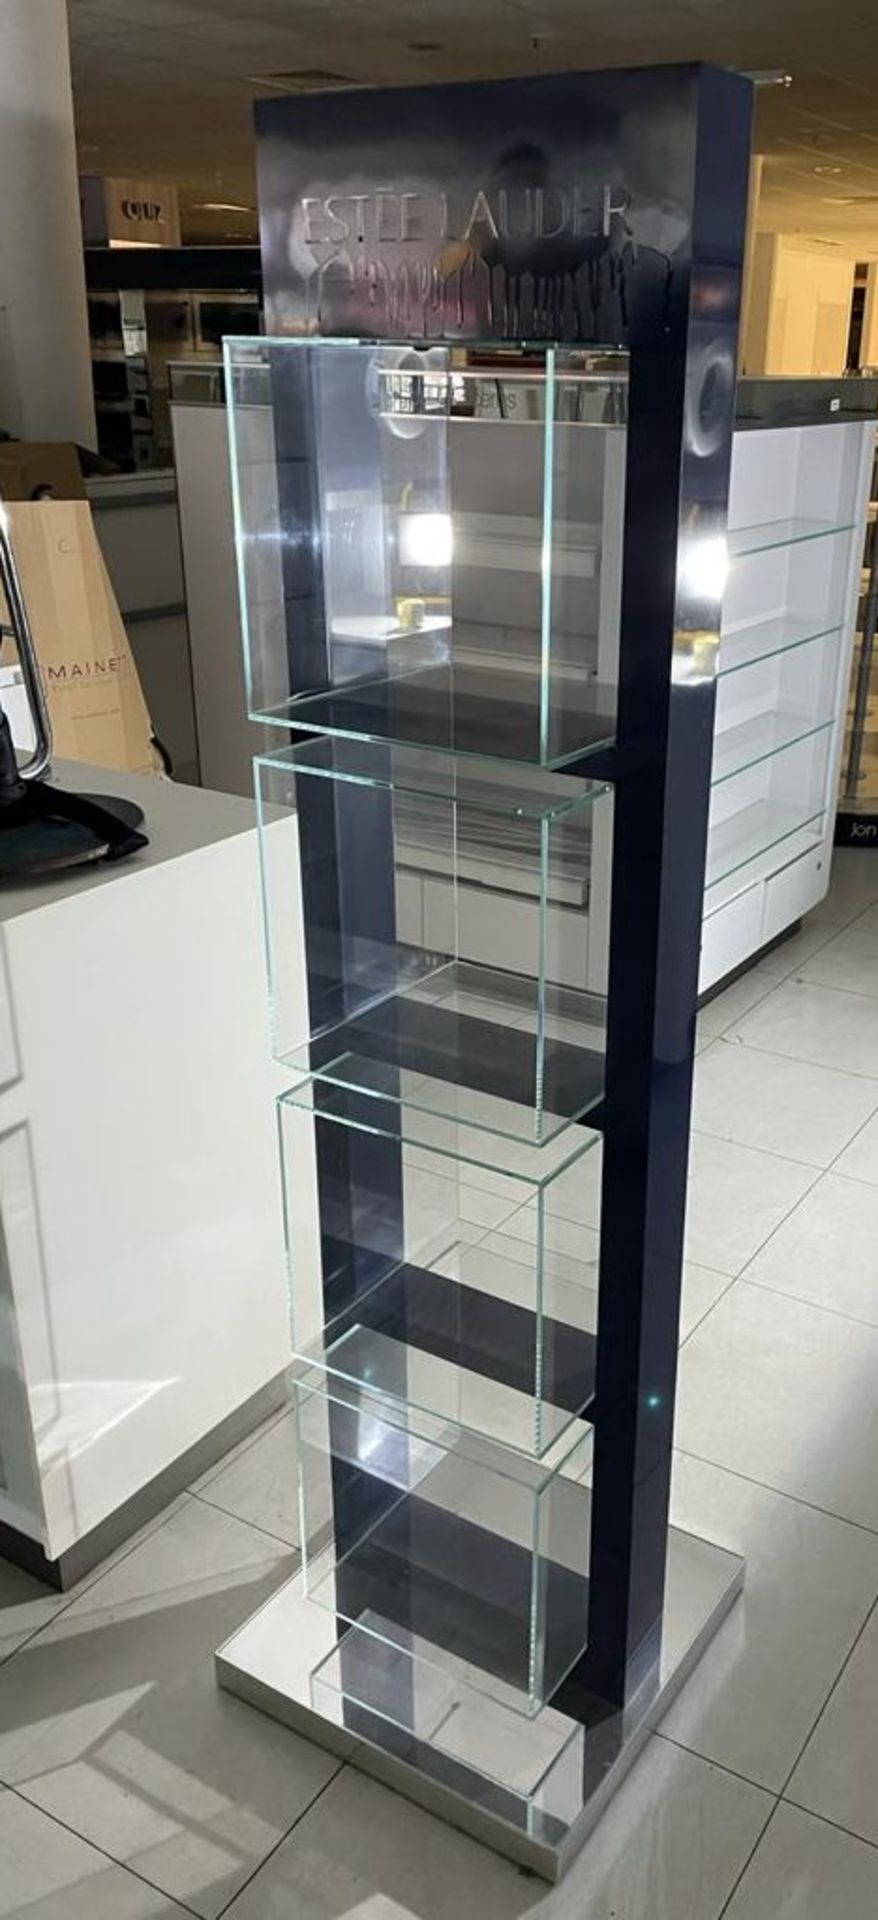 1 x Estee Lauder Free Standing Retail Display Unit With Glass Cube Display Shelves - Size H175 x W49